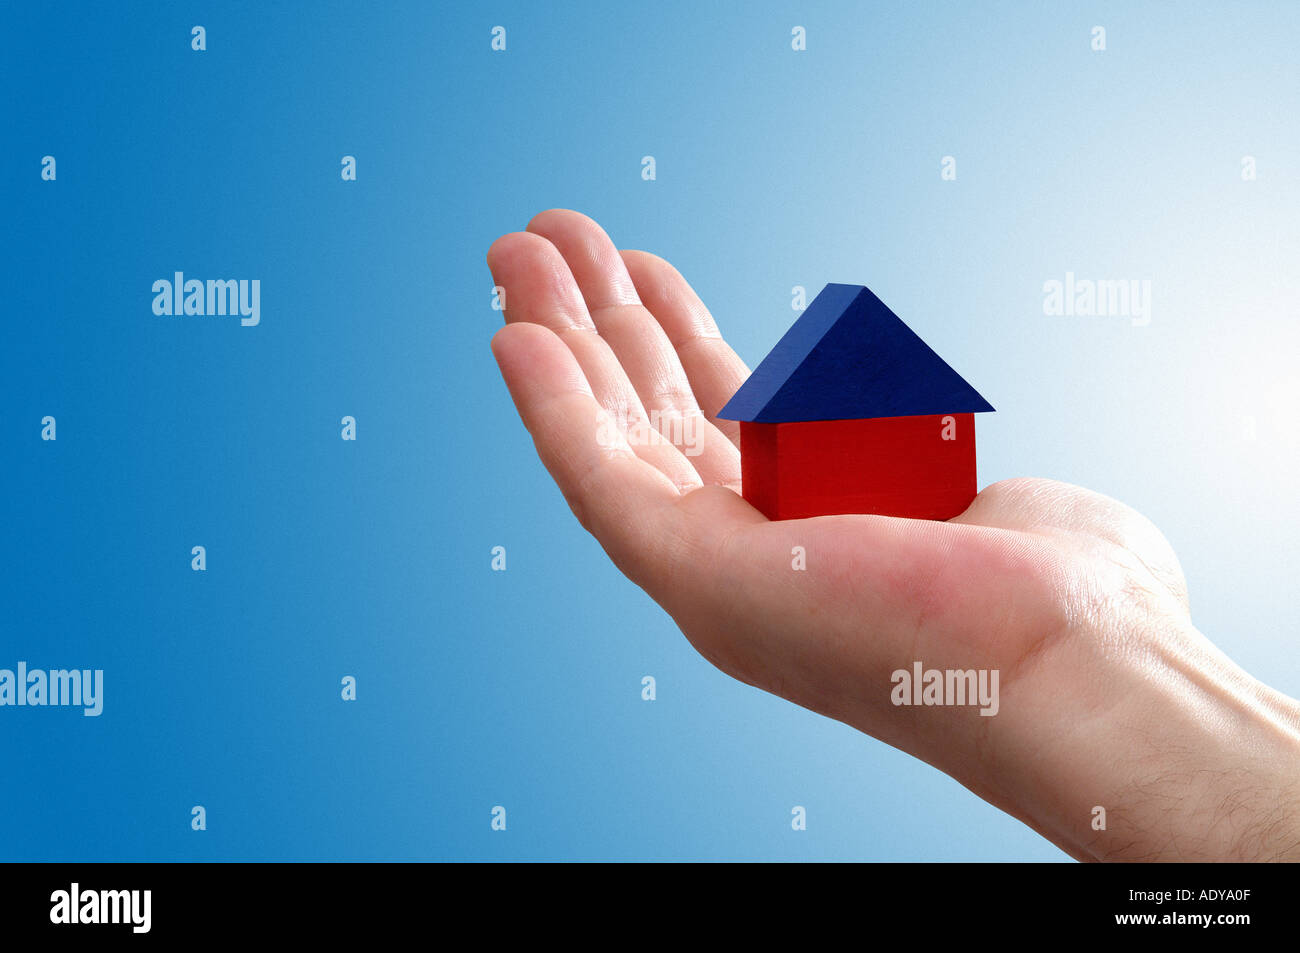 Hands people person close close up hand hands finger wrist hold holding home house roof small little palm owner miniature reduce Stock Photo